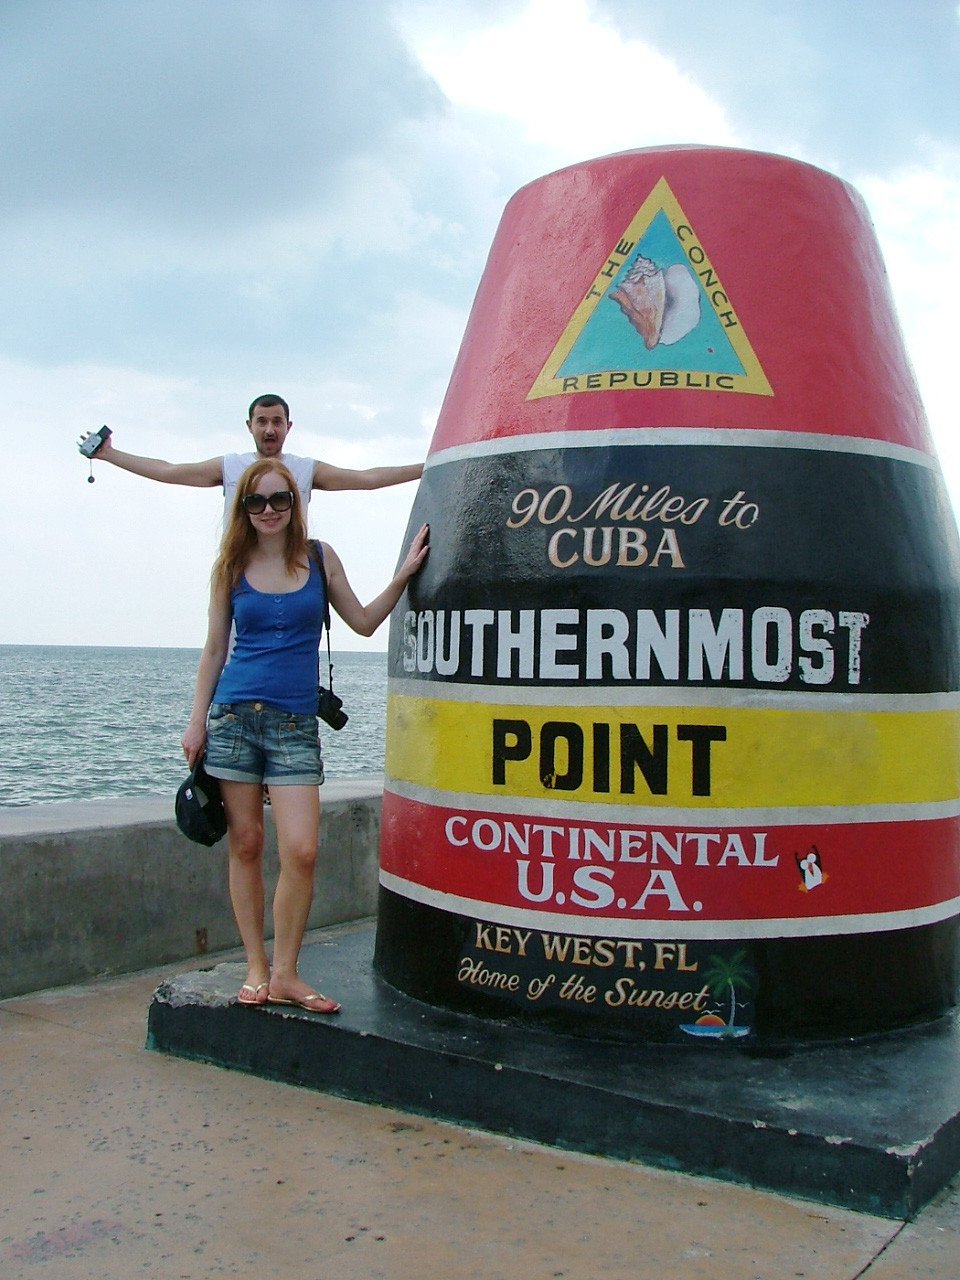 The Southernmost point in the US: Key West, Florida